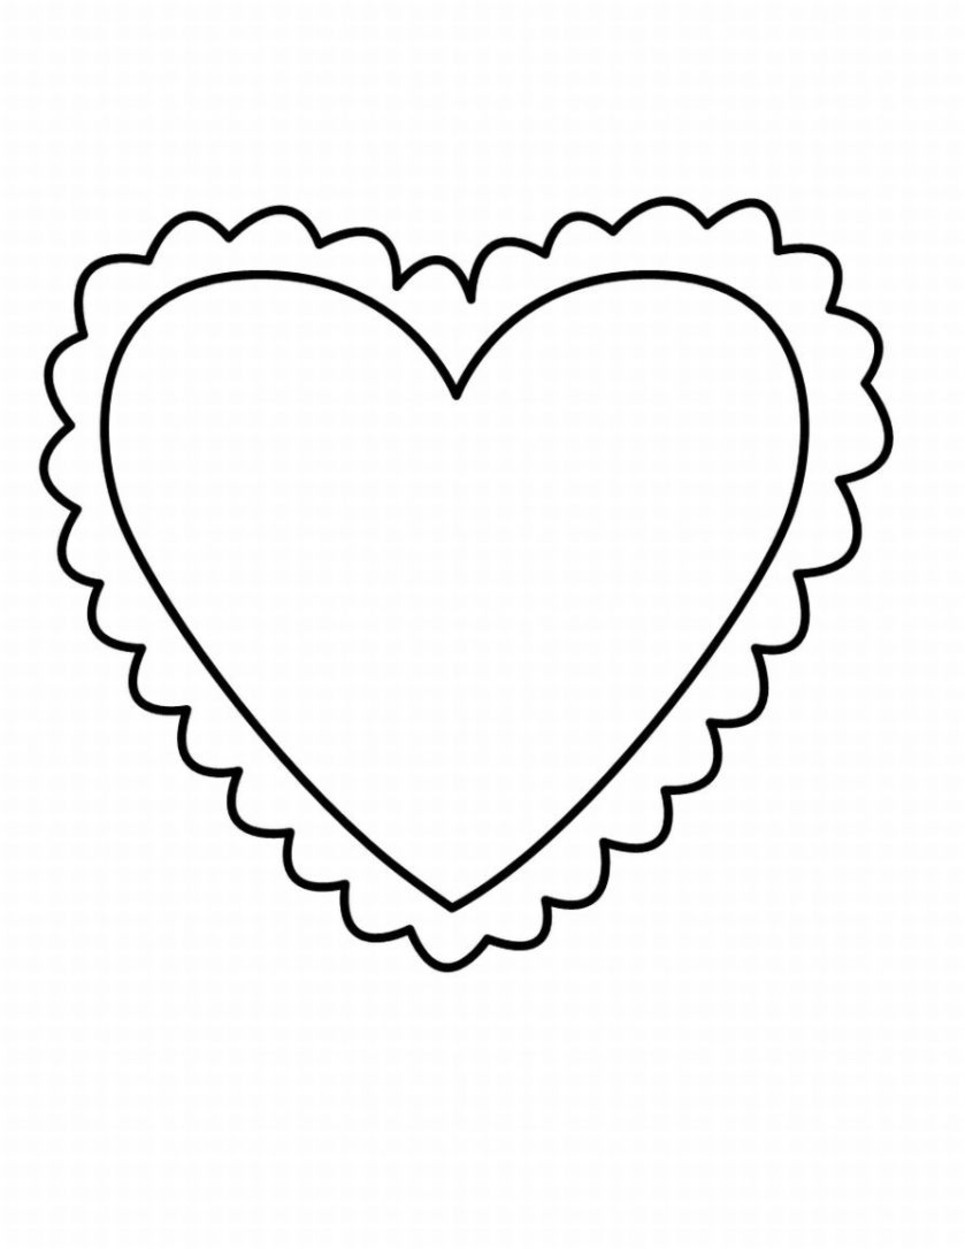 Valintime Coloring Pages at GetDrawings | Free download